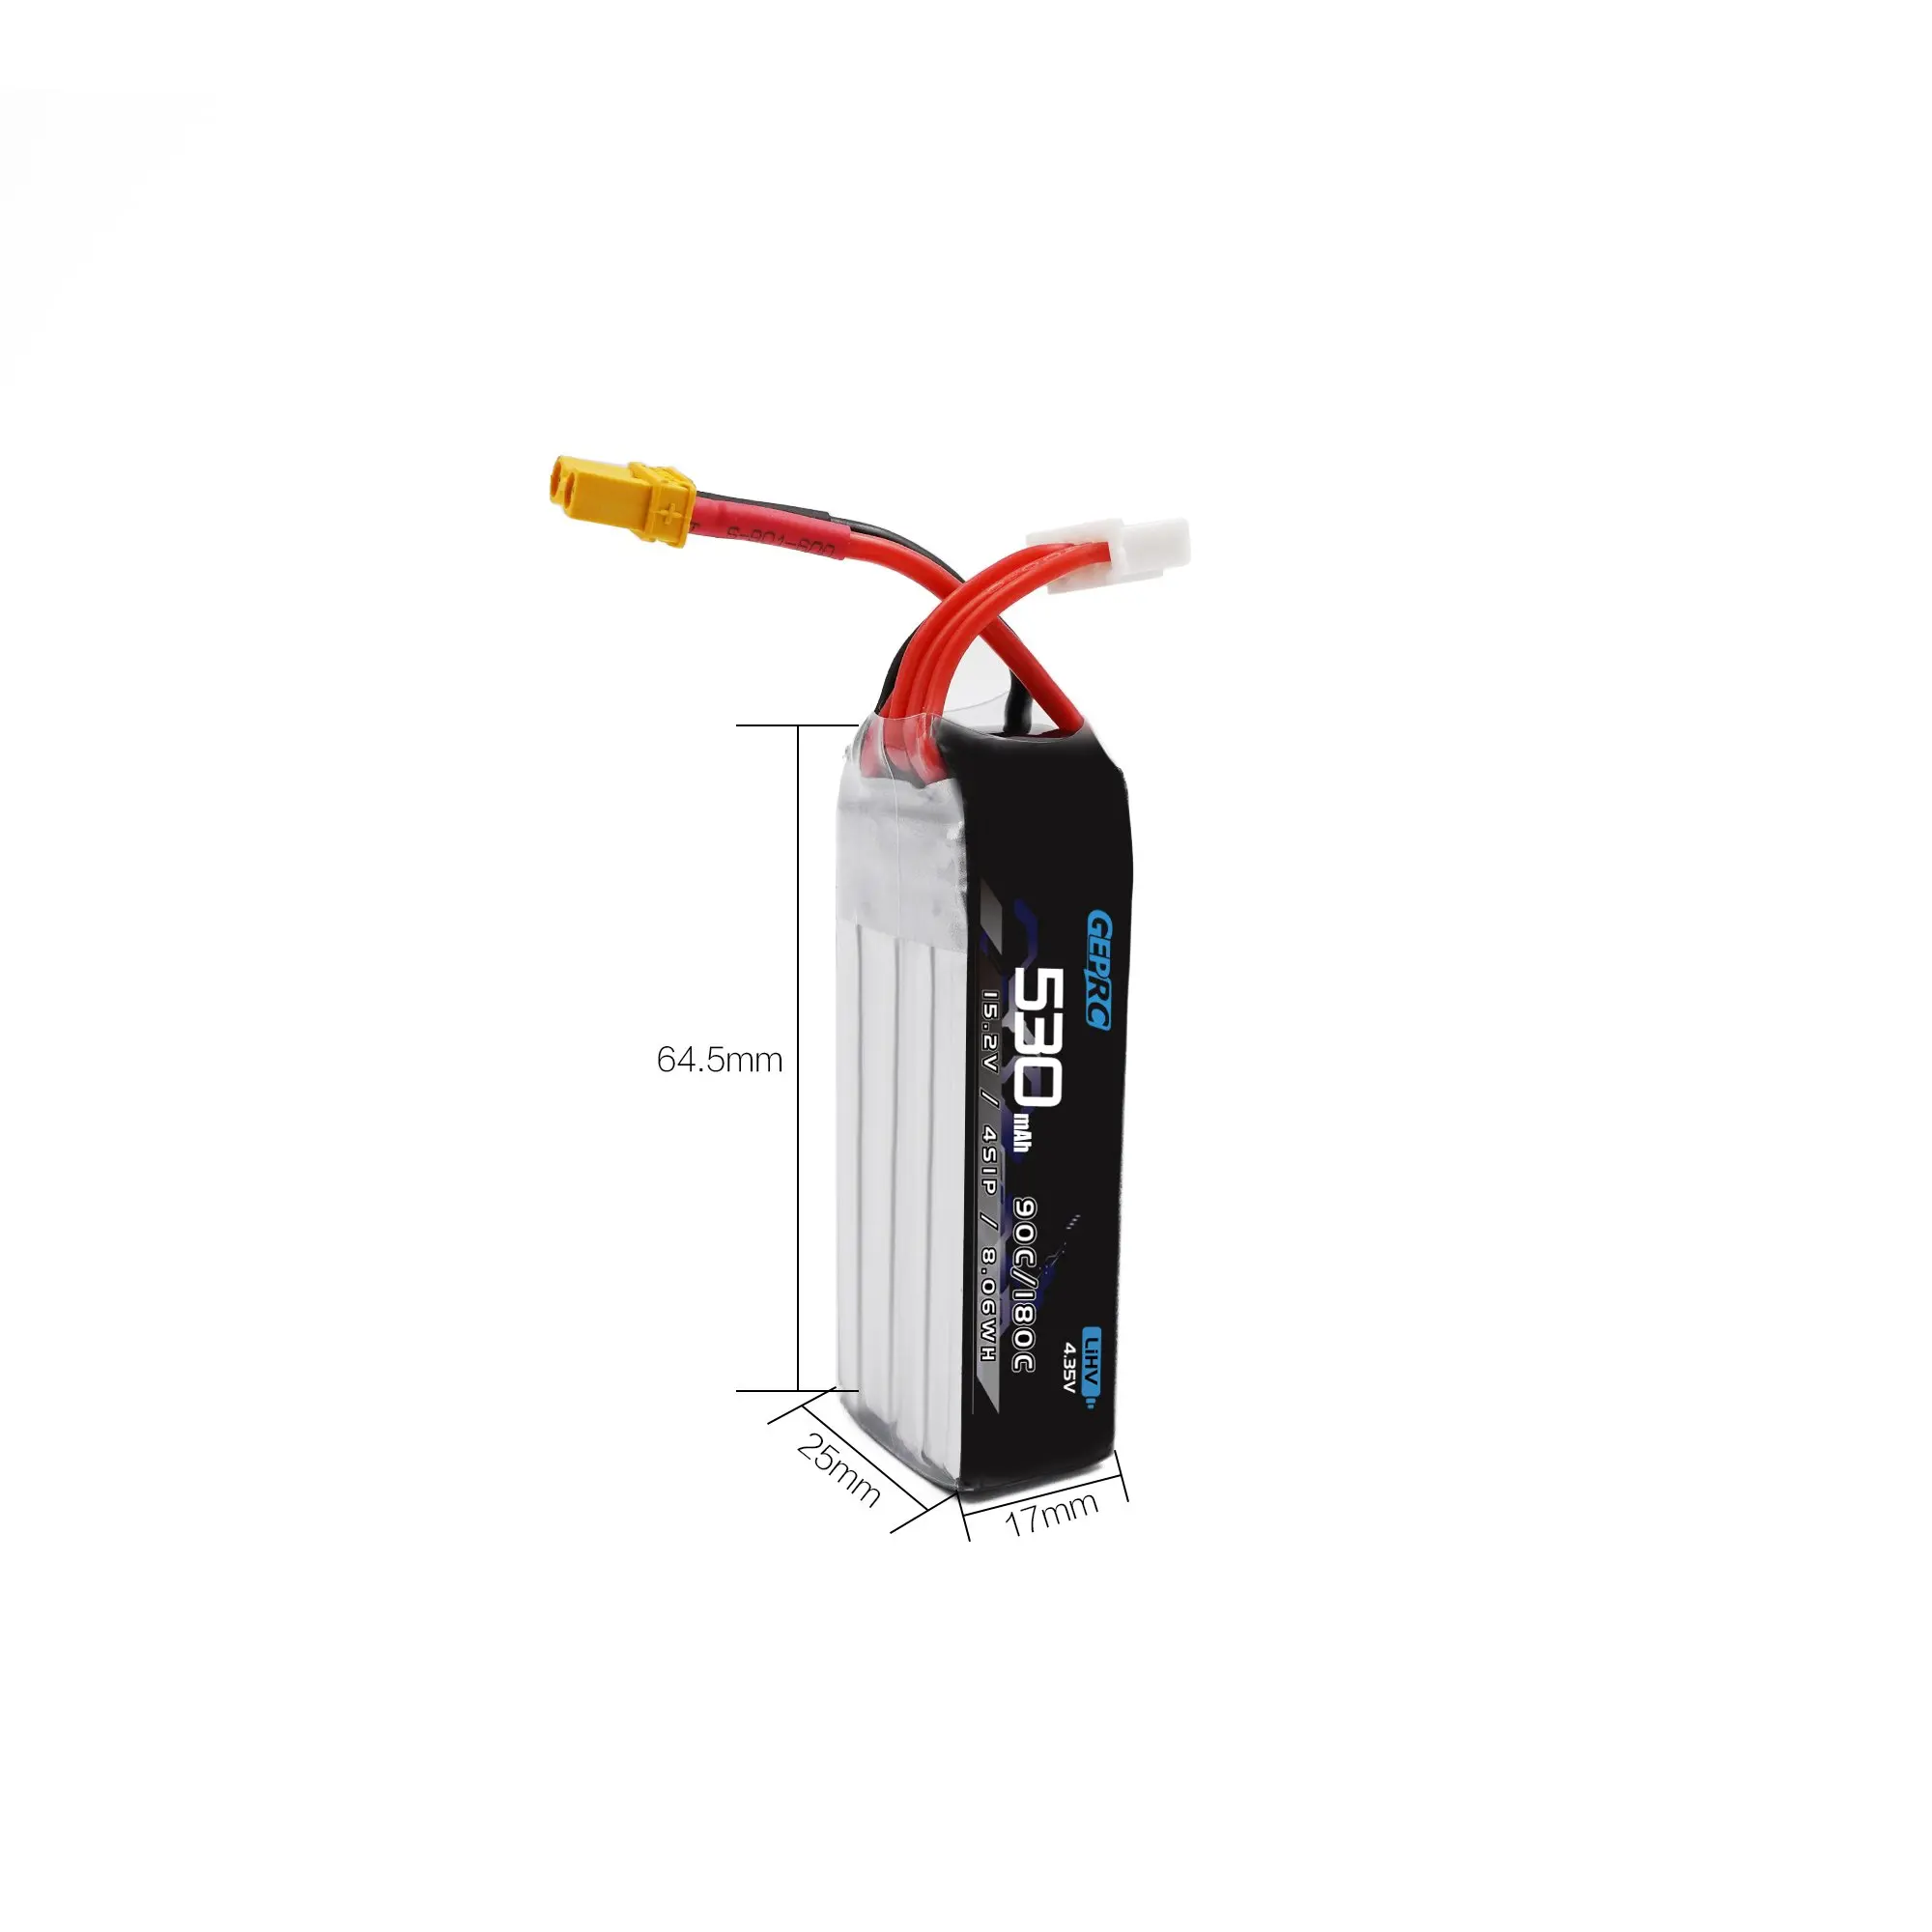 GEPRC 4S 530mAh LiPo Battery, the single-cell discharge voltage of LIPO and LiHV batteries cannot be lower than 